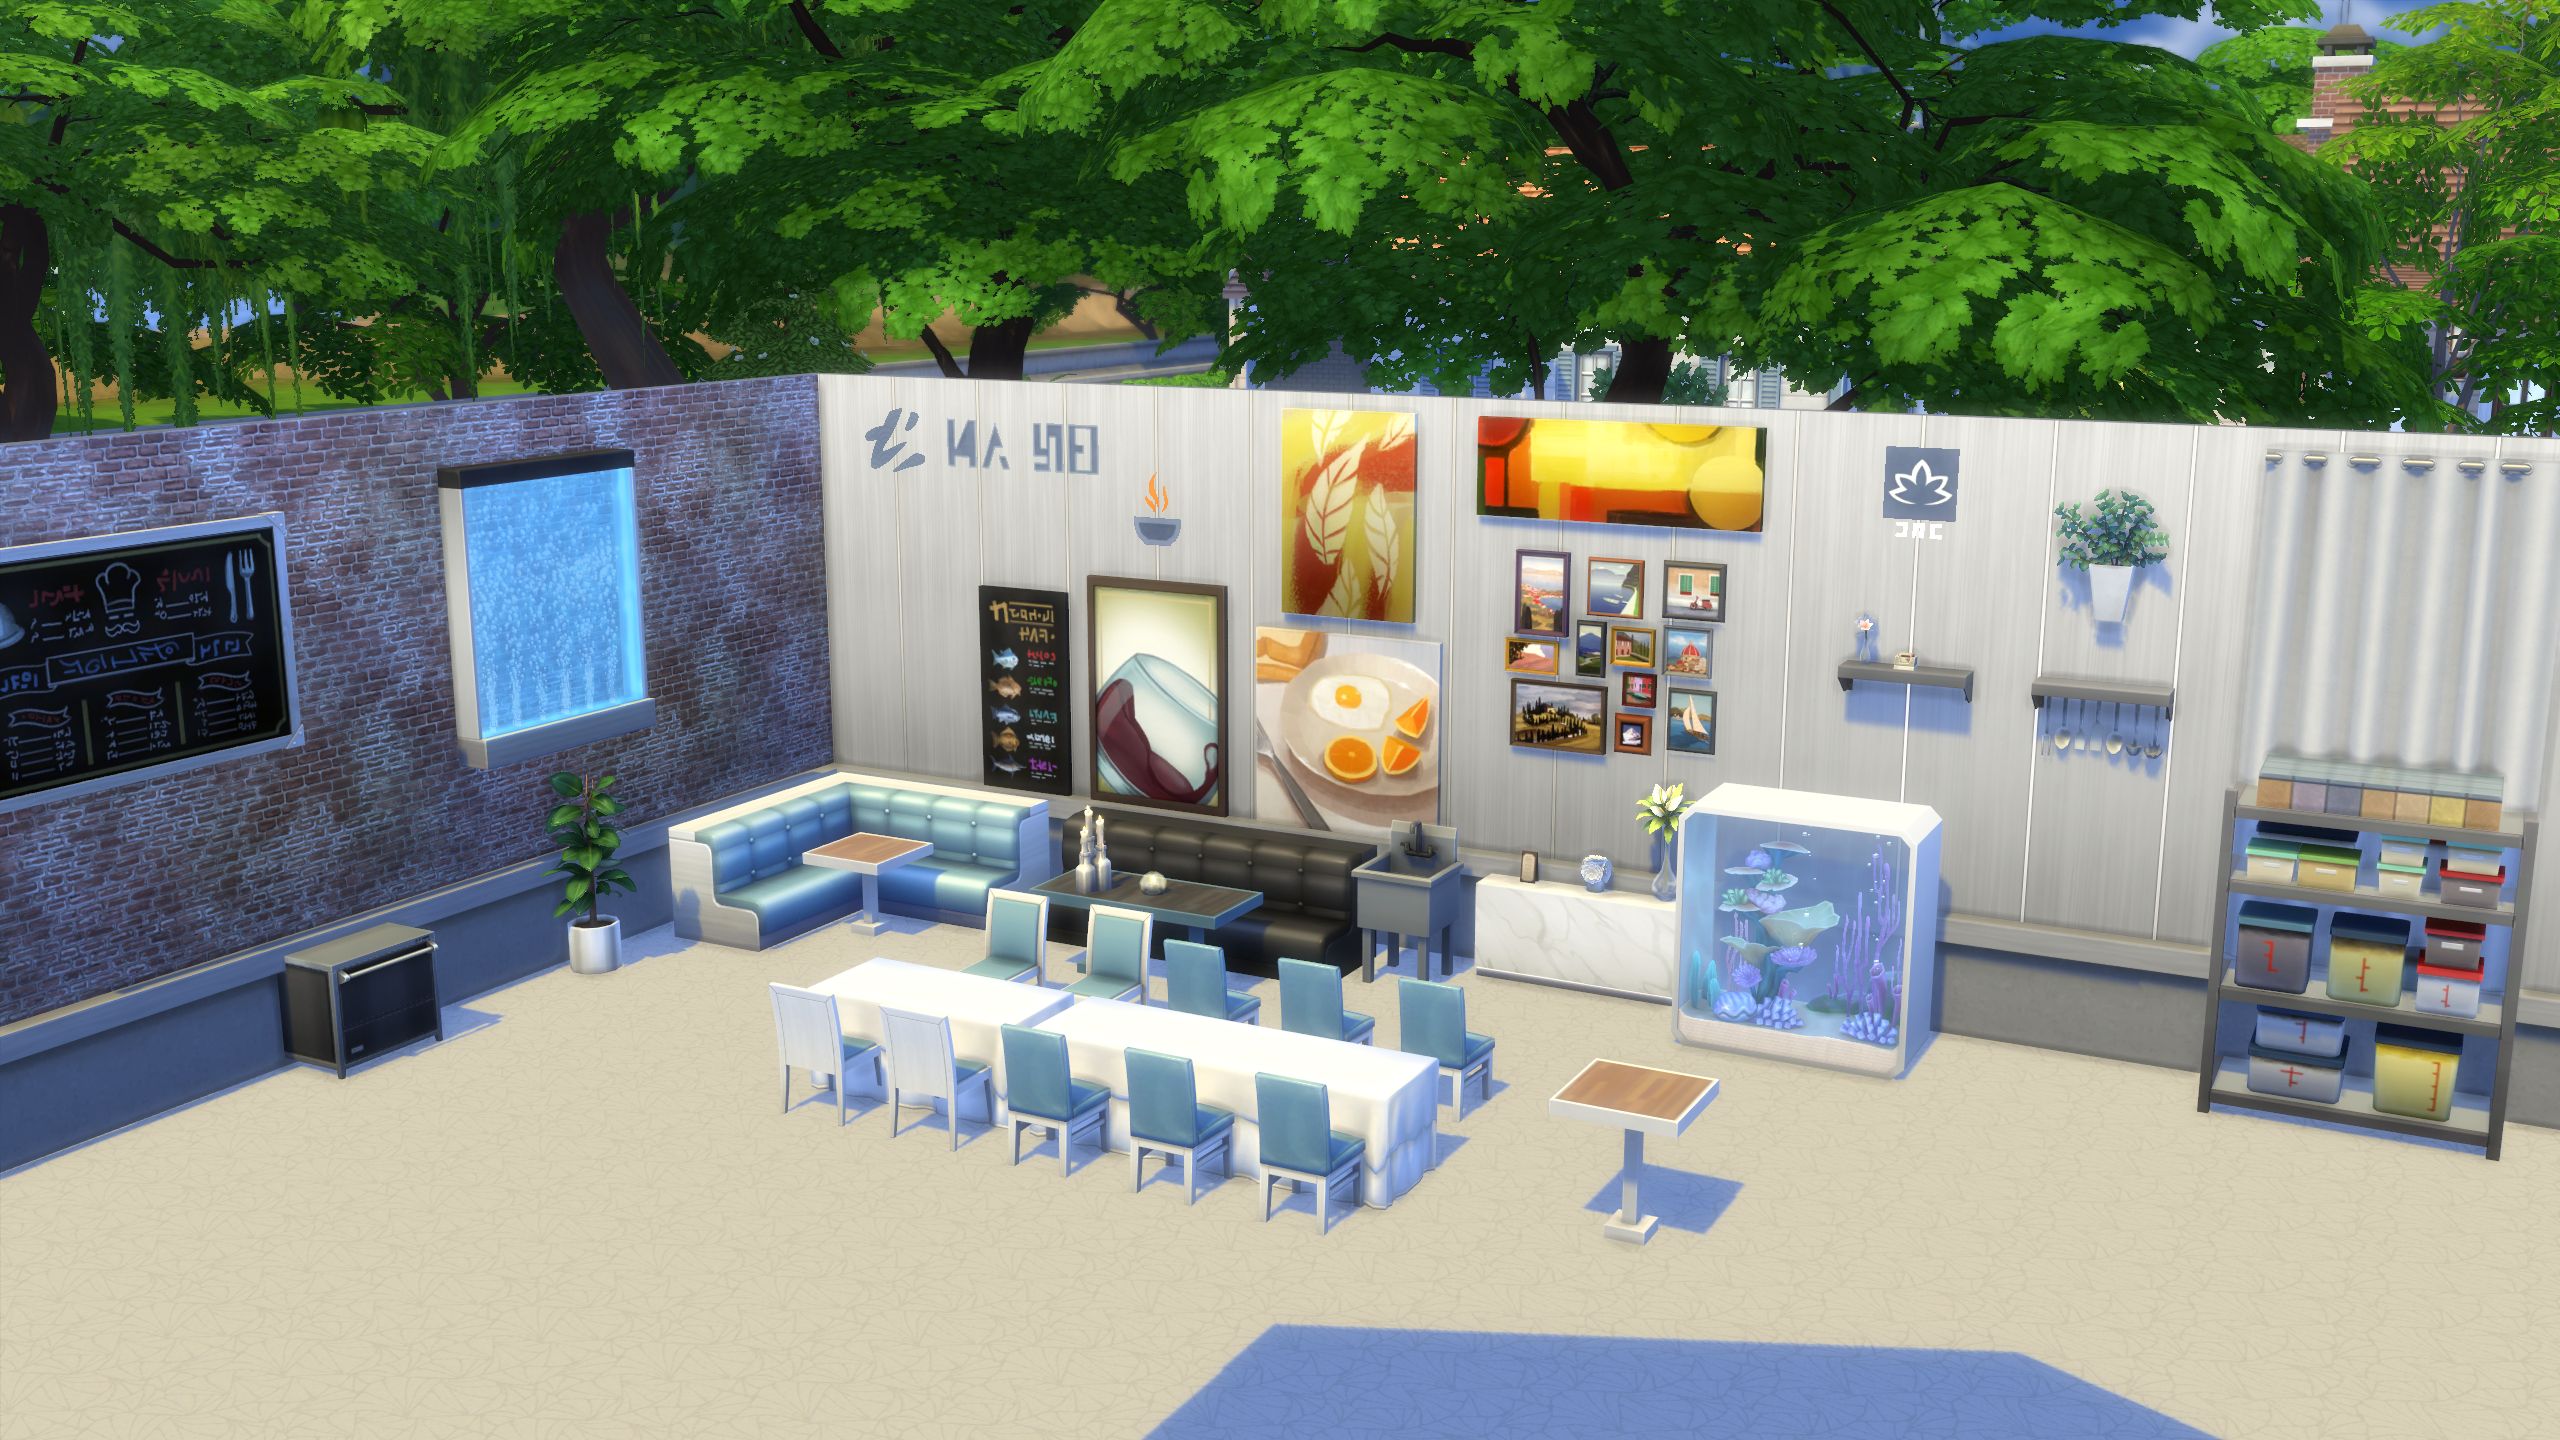 The Sims 4 Dine Out Game Pack: Guides, Features & Pictures